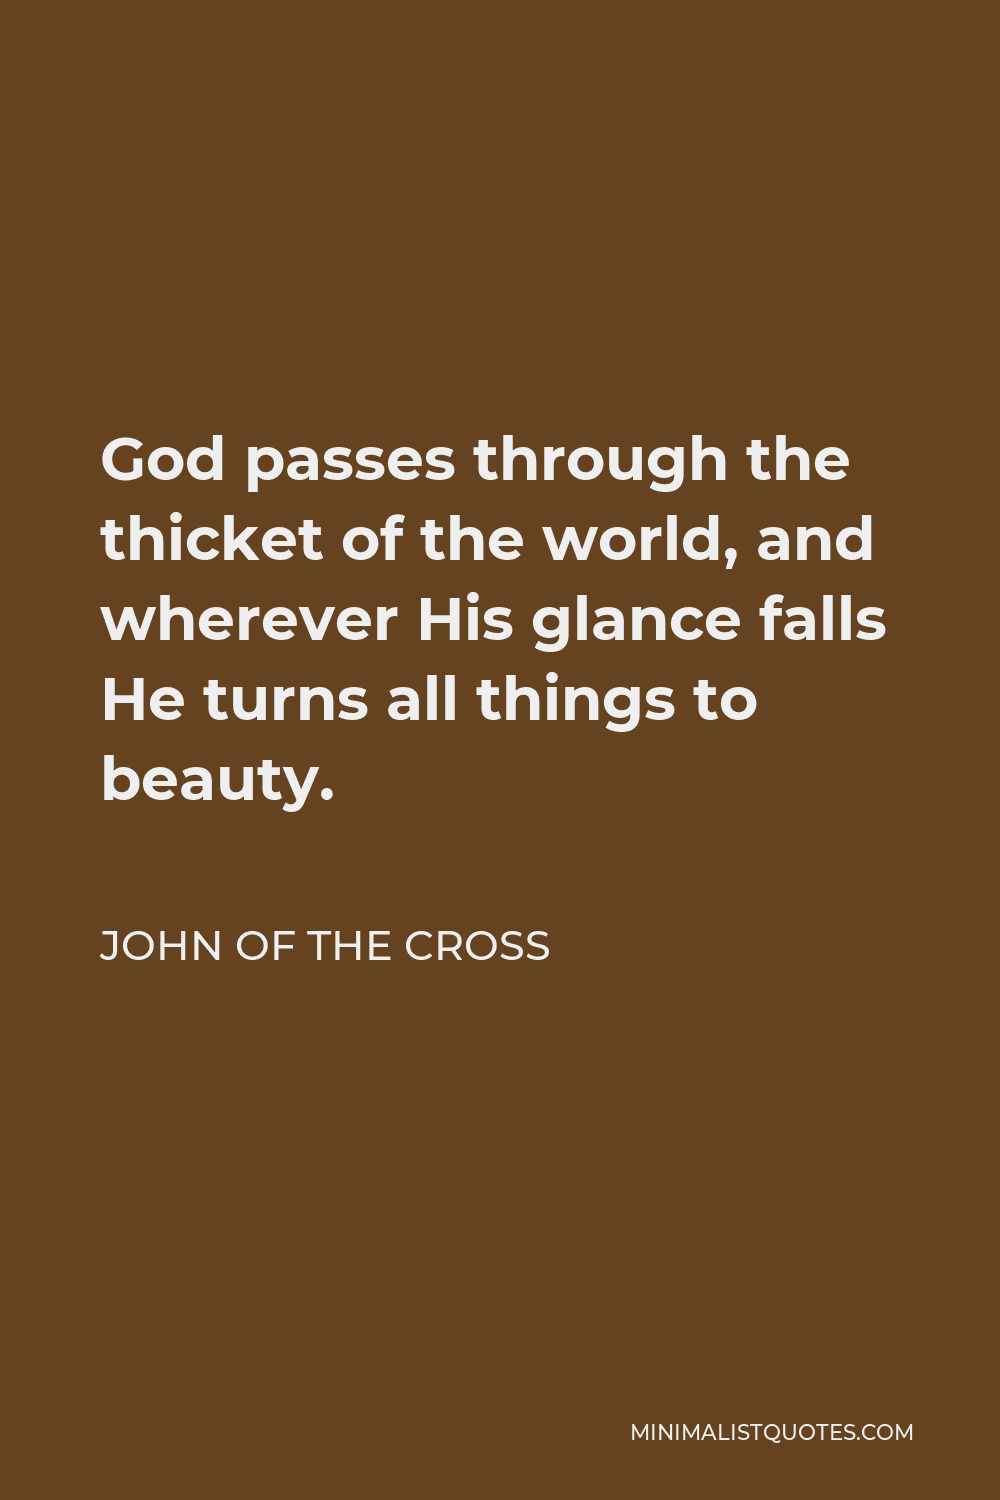 John of the Cross Quote - God passes through the thicket of the world, and wherever His glance falls He turns all things to beauty.